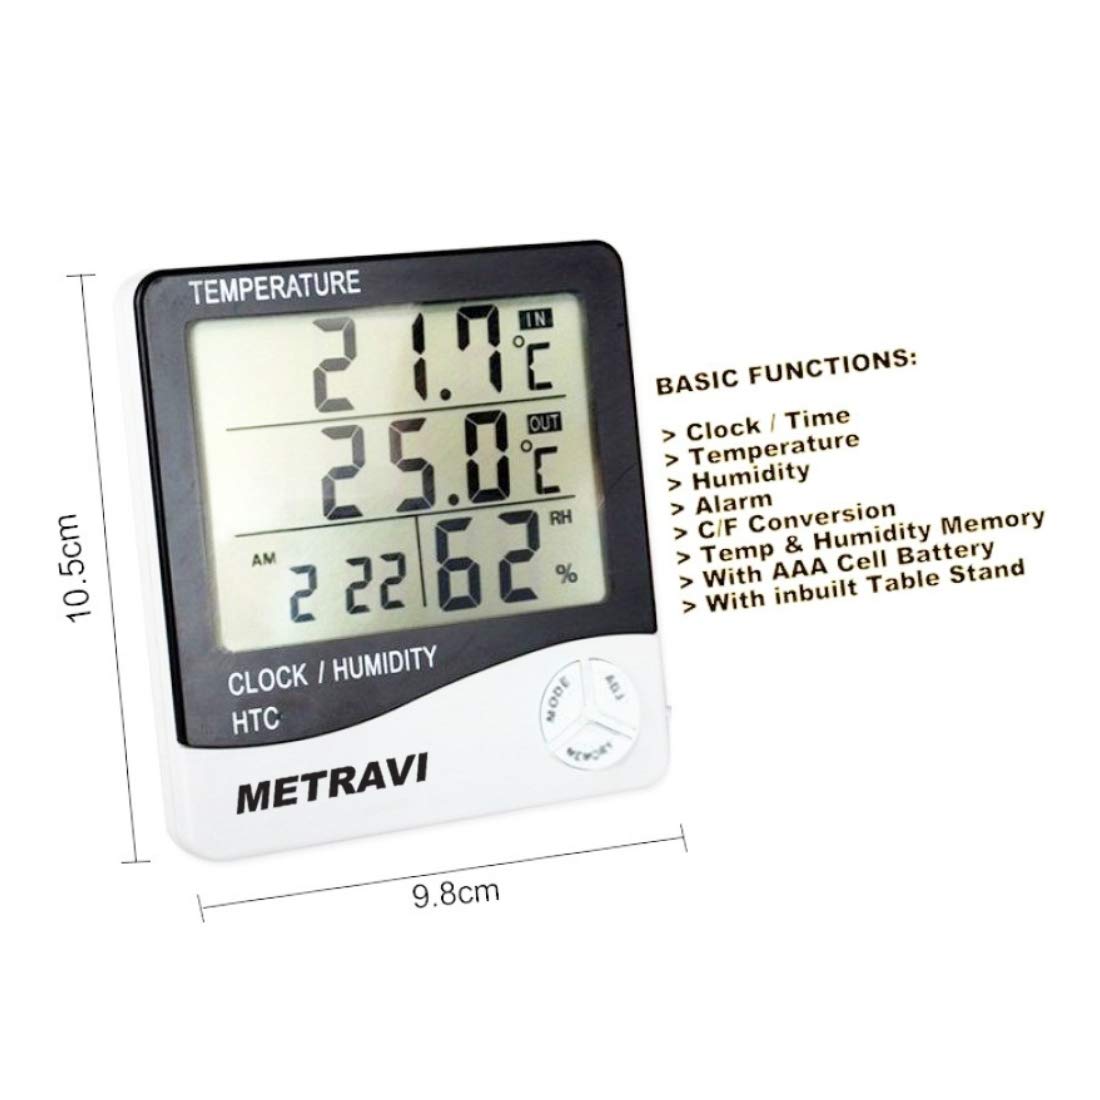 Metravi HTC-01 Compact Digital Temperature and Humidity Meter/Thermo-hygro Meter with Clock & Alarm